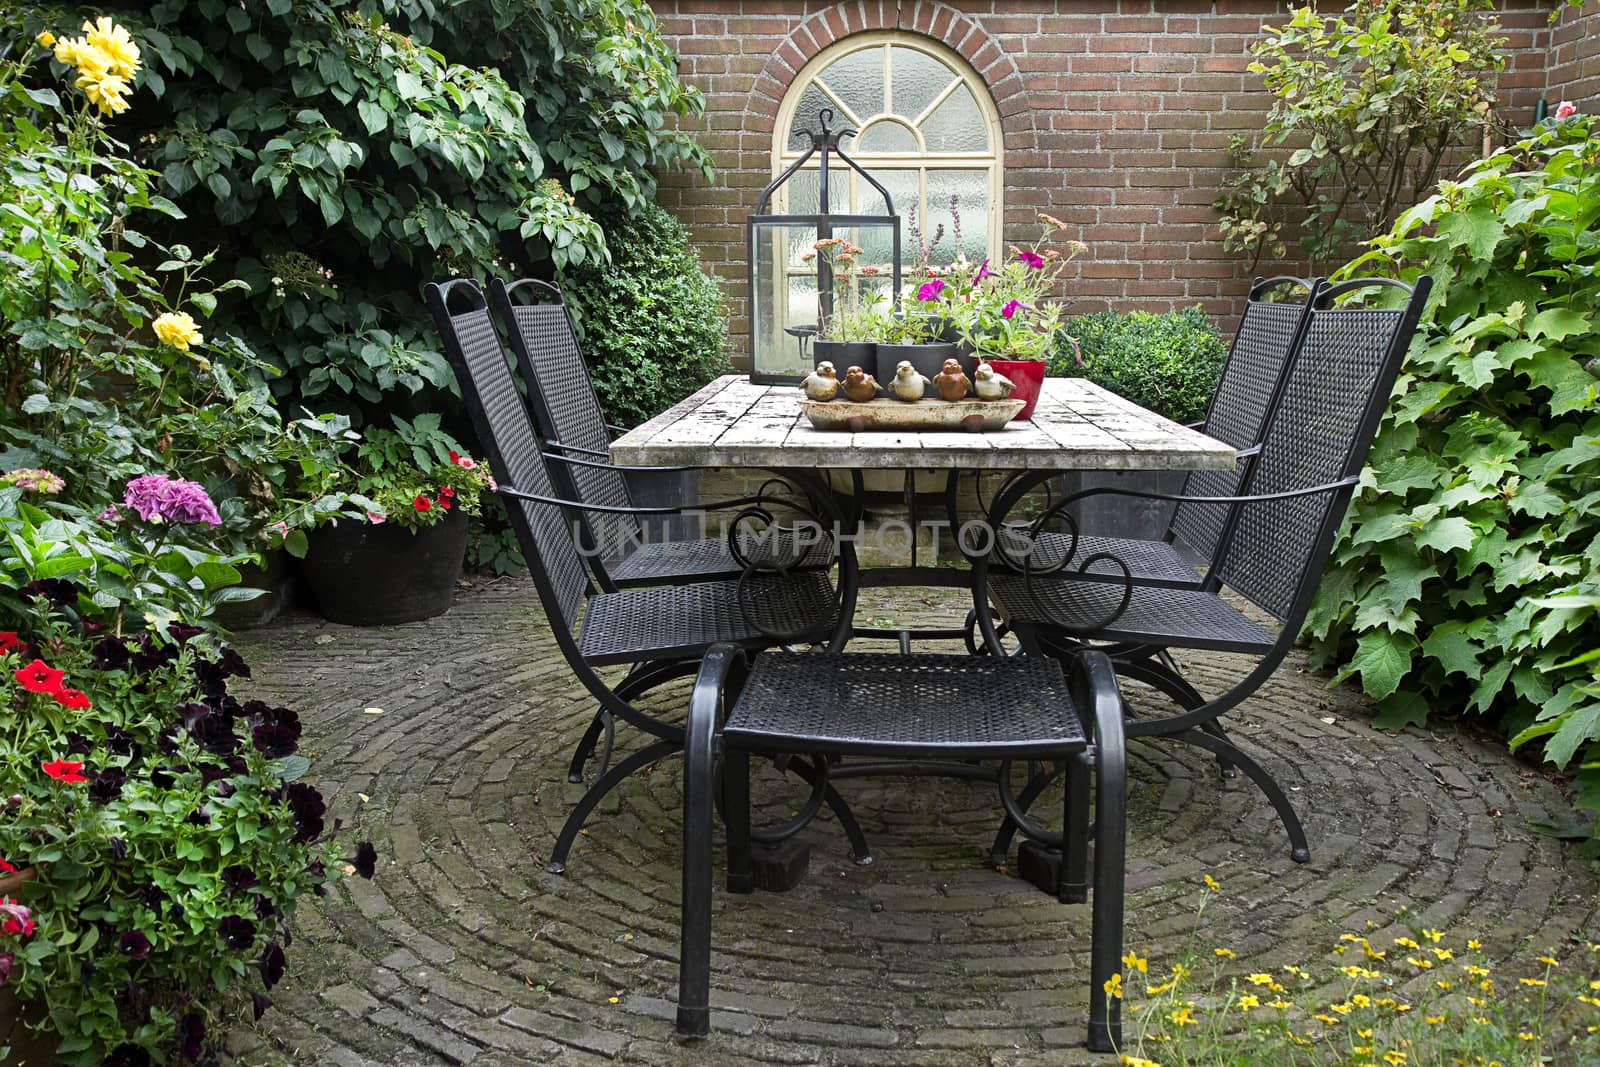 Iron forged table and chairs in garden by Colette